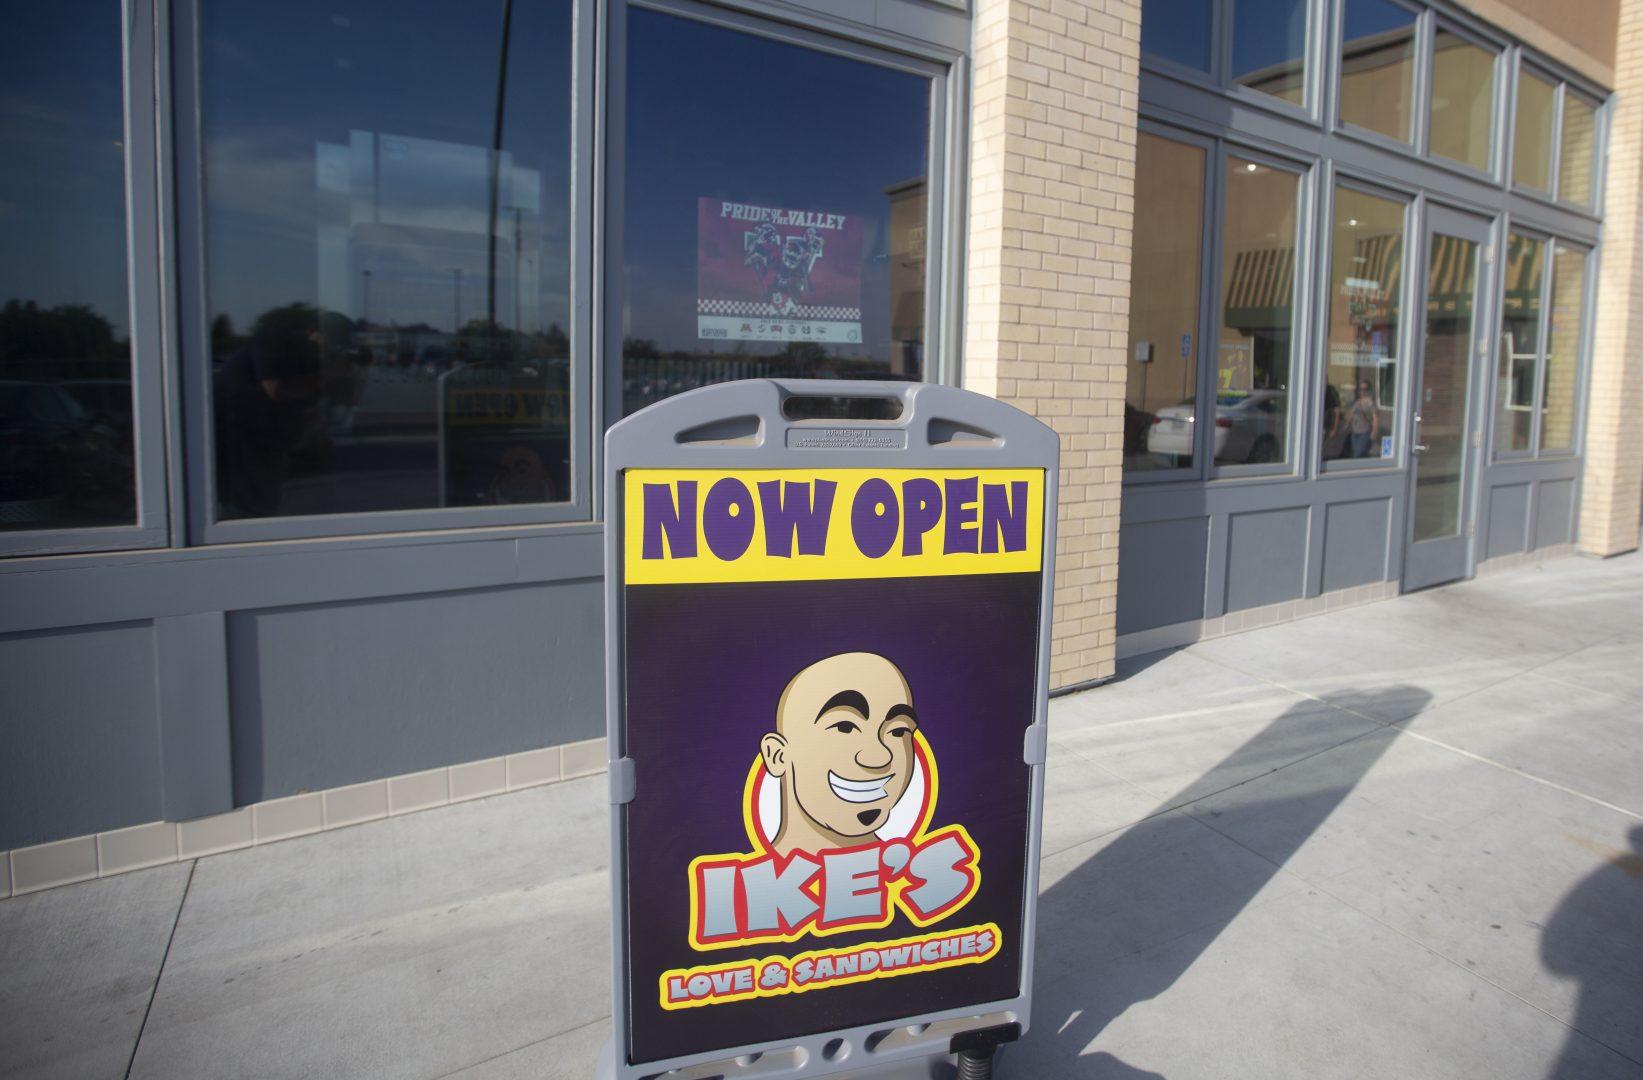 The closest Ikes Love & Sandwiches to Fresno State can be located at Campus Pointe at the address 3071 E. Campus Pointe Drive. (Larry Valenzuela/The Collegian)